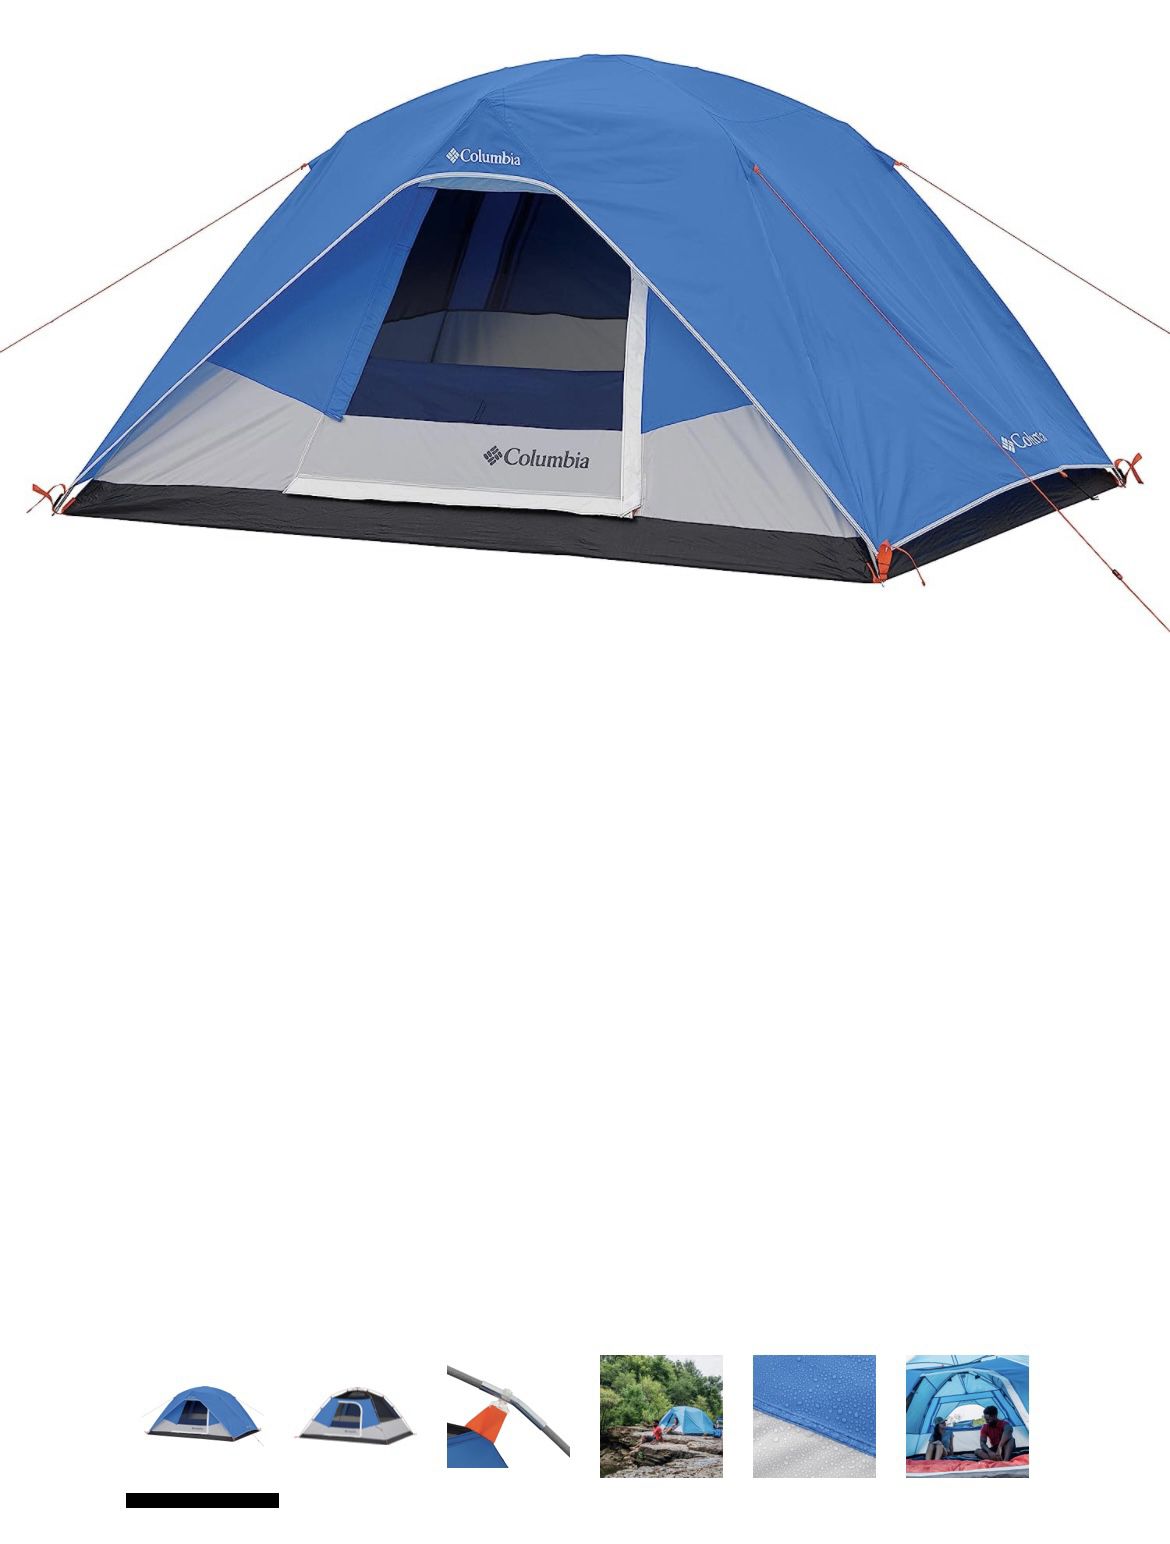 Columbia Tent - Dome Tent | 4 Person Tent | Best Camp Tent for Hiking, Backpacking, & Family Camping